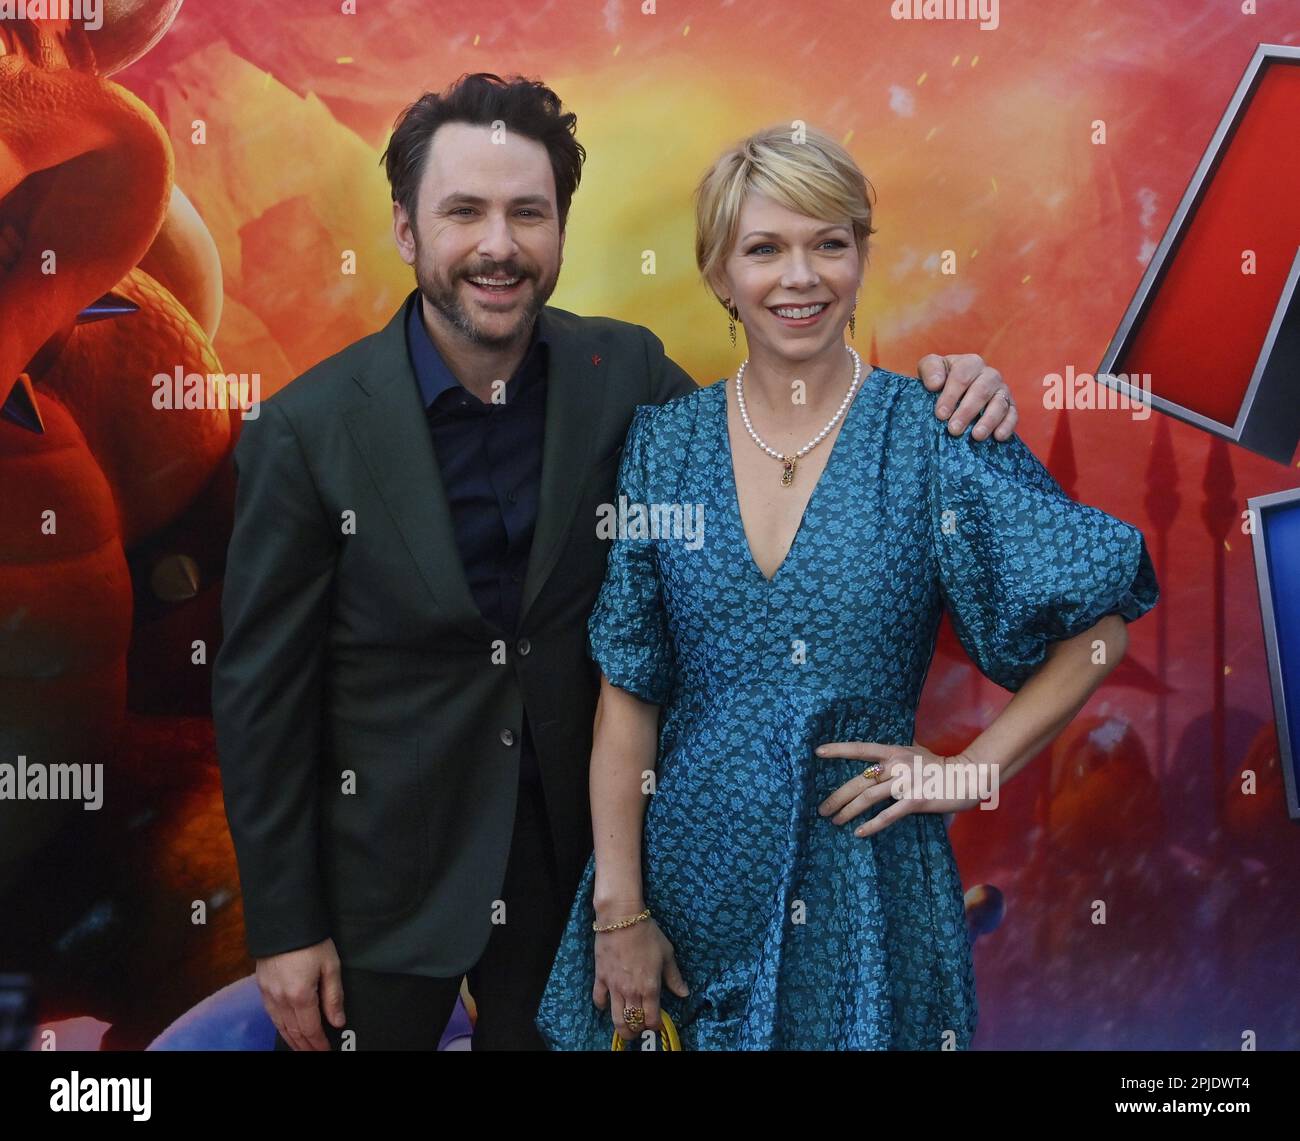 Cast member Charlie Day, the voice of Luigi and his wife, actress Mary Elizabeth Ellis attend the premiere of the animated sci-fi fantasy comedy motion picture 'The Super Mario Bros. Movie' at Regal L.A. Live in Los Angeles on Saturday, April 1, 2023. Storyline: A Brooklyn plumber named Mario travels through the Mushroom Kingdom with a princess named Peach and an anthropomorphic mushroom named Toad to find Mario's brother, Luigi, and to save the world from a ruthless fire-breathing Koopa named Bowser. Photo by Jim Ruymen/UPI Stock Photo